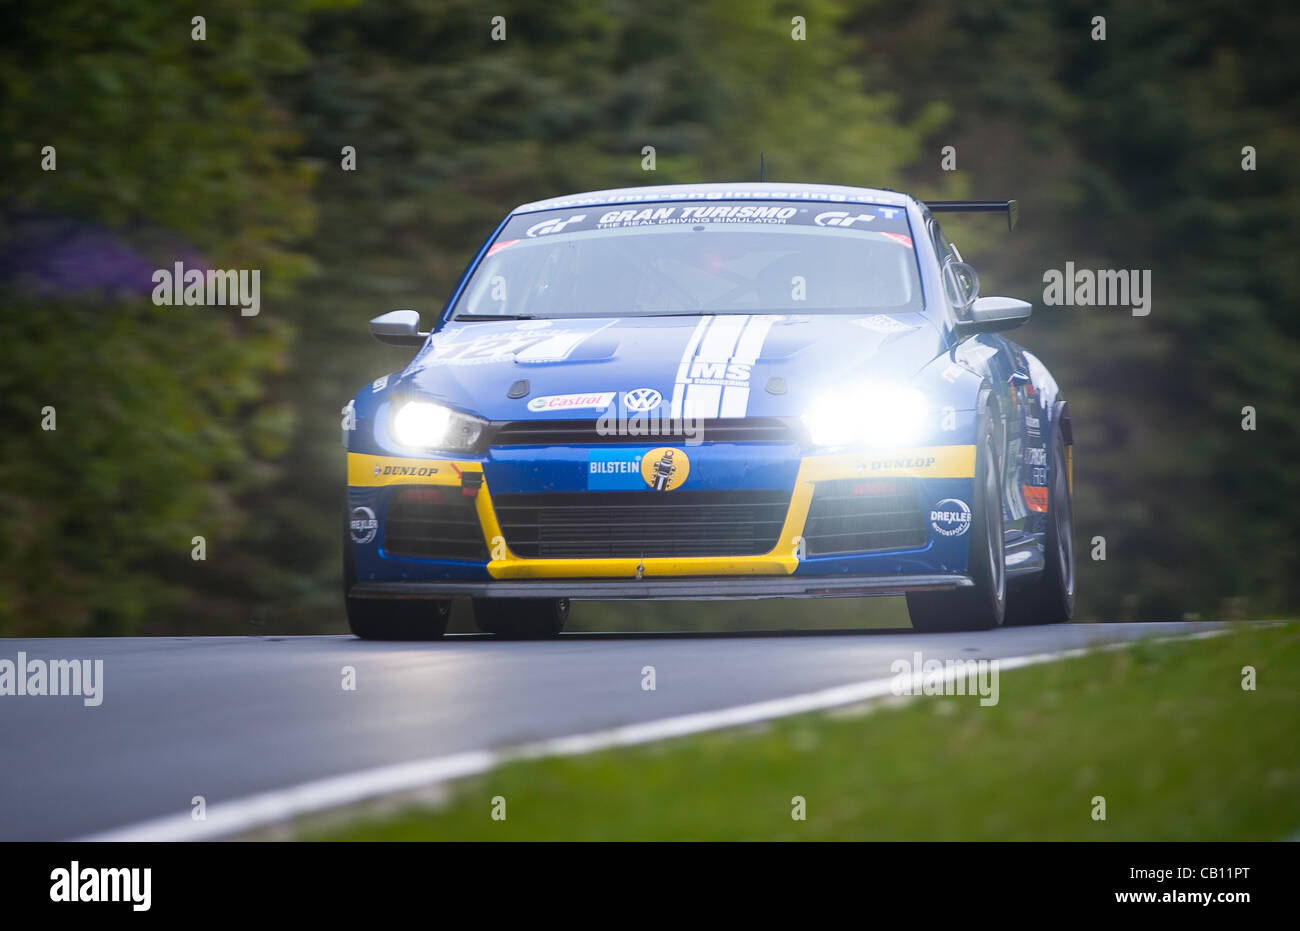 Christian Krognes (NOR) / Maik Rosenberg (GER) driving the #127 SP3-T LMS Engineering Volkswagen Scirocco GT24 during qualifying for the Nurburgring 24 hour race near Nurburg, Germany on May 17, 2012. Photo: Matt Jacques Stock Photo